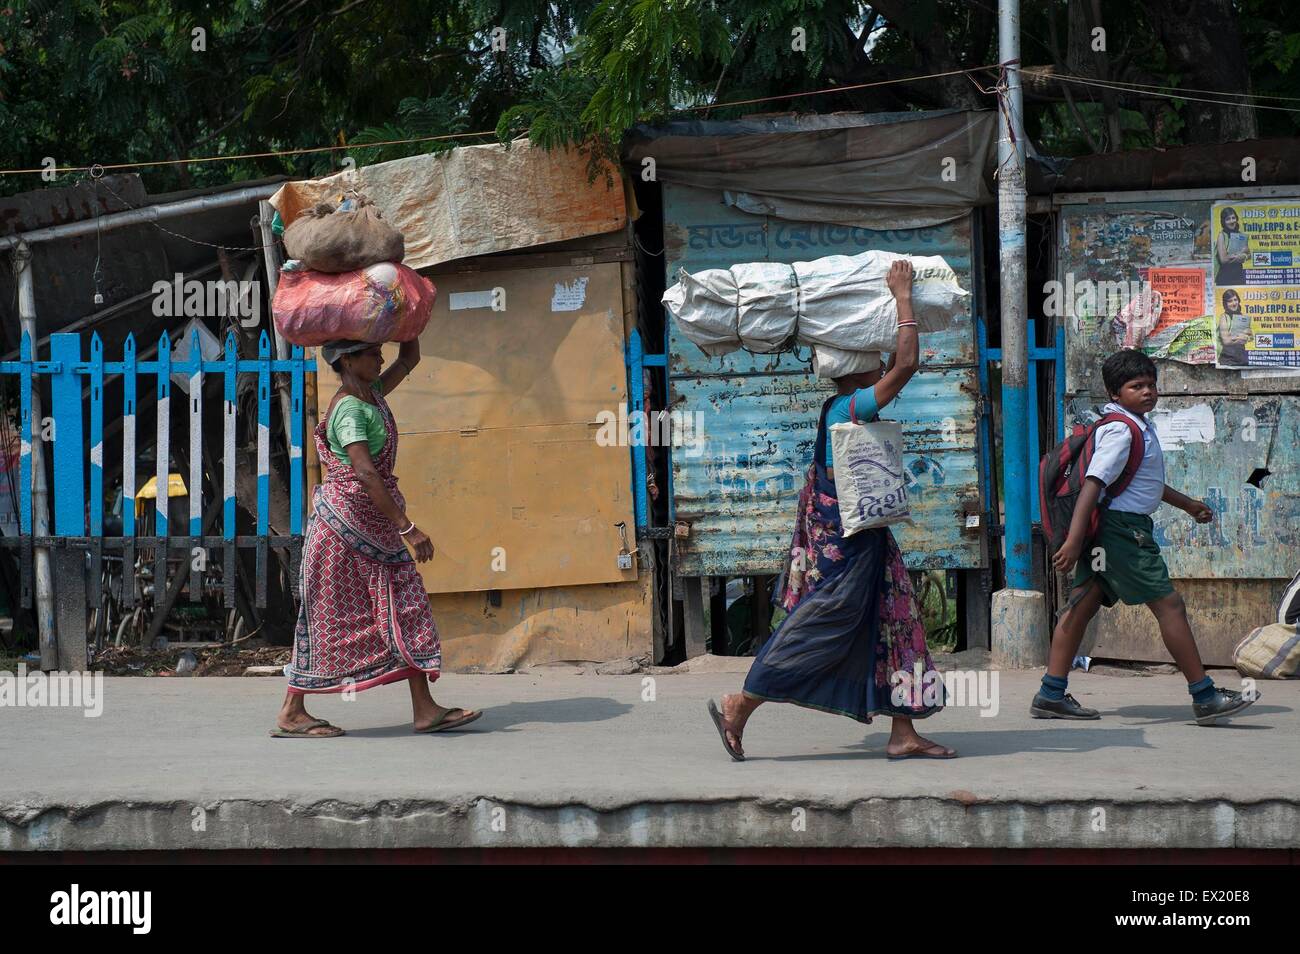 Kolkata, Indian state West Bengal. 4th July, 2015. Indian village women carry heavy loads in Kolkata, capital of eastern Indian state West Bengal, July 4, 2015. India has released new socio-economic and caste census data which covers the period between 2011 and 2013 to show the wealth, living conditions and other details of the country's 1.2 billion people. Nearly one third are landless, and half derive their income mainly from manual labor. © Tumpa Mondal/Xinhua/Alamy Live News Stock Photo